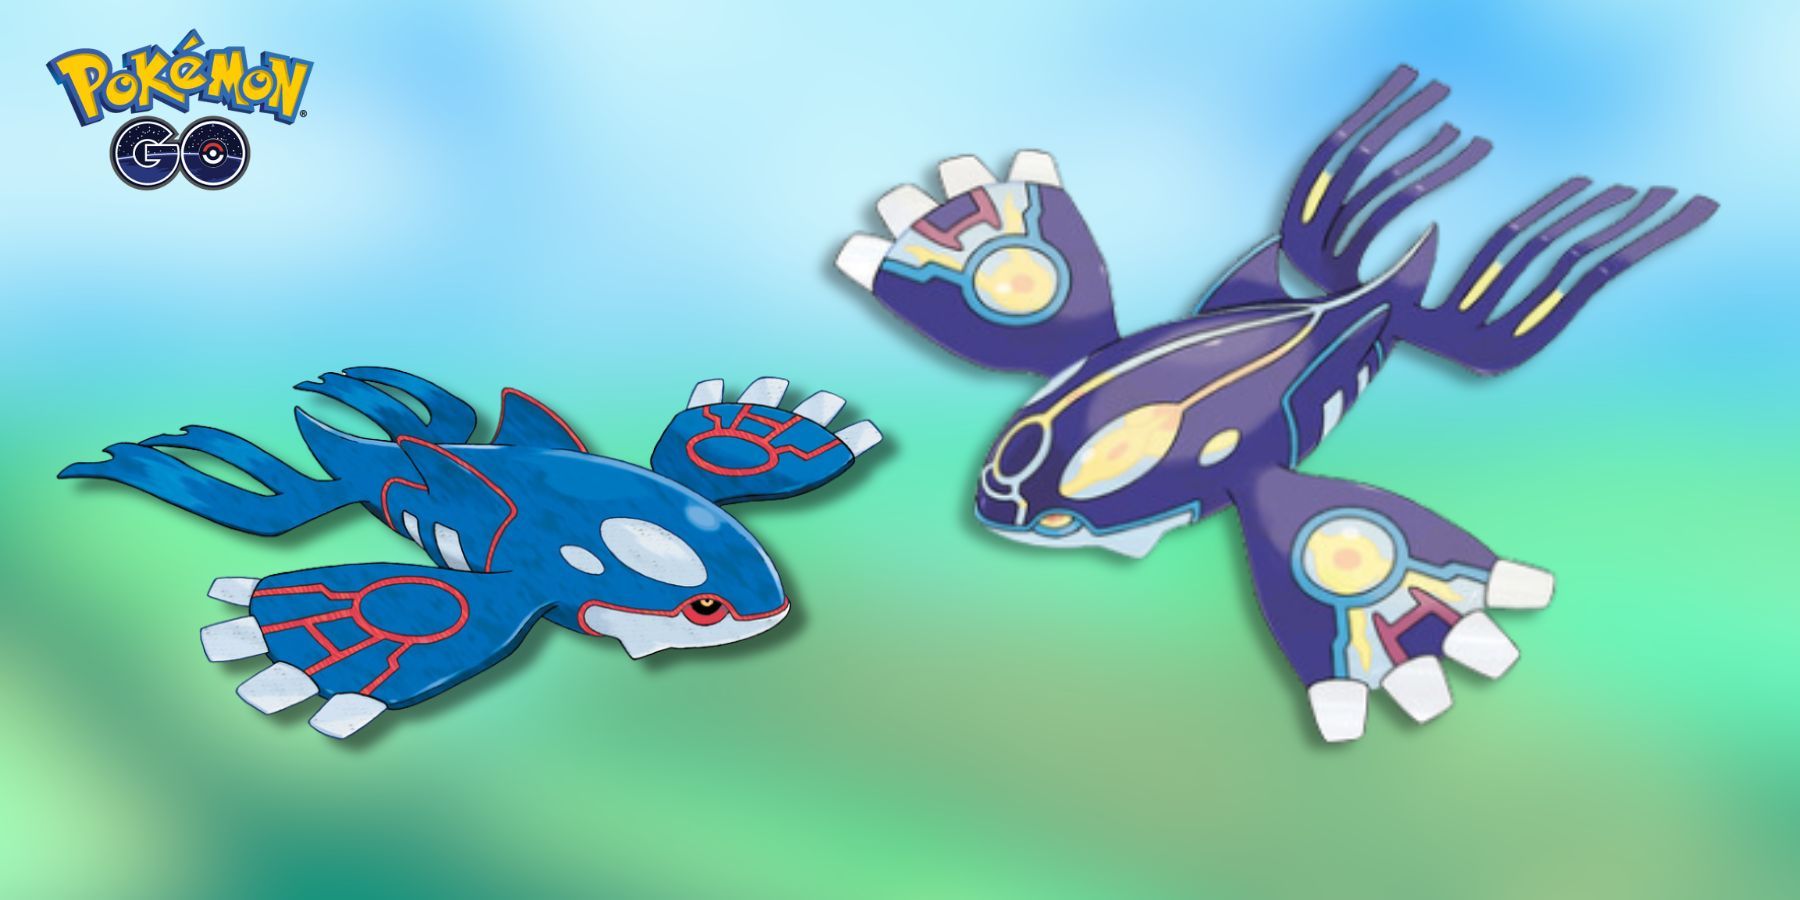 Kyogre and Groudon Join Rayquaza for a Legendary Week of Raid Battles! – Pokémon  GO